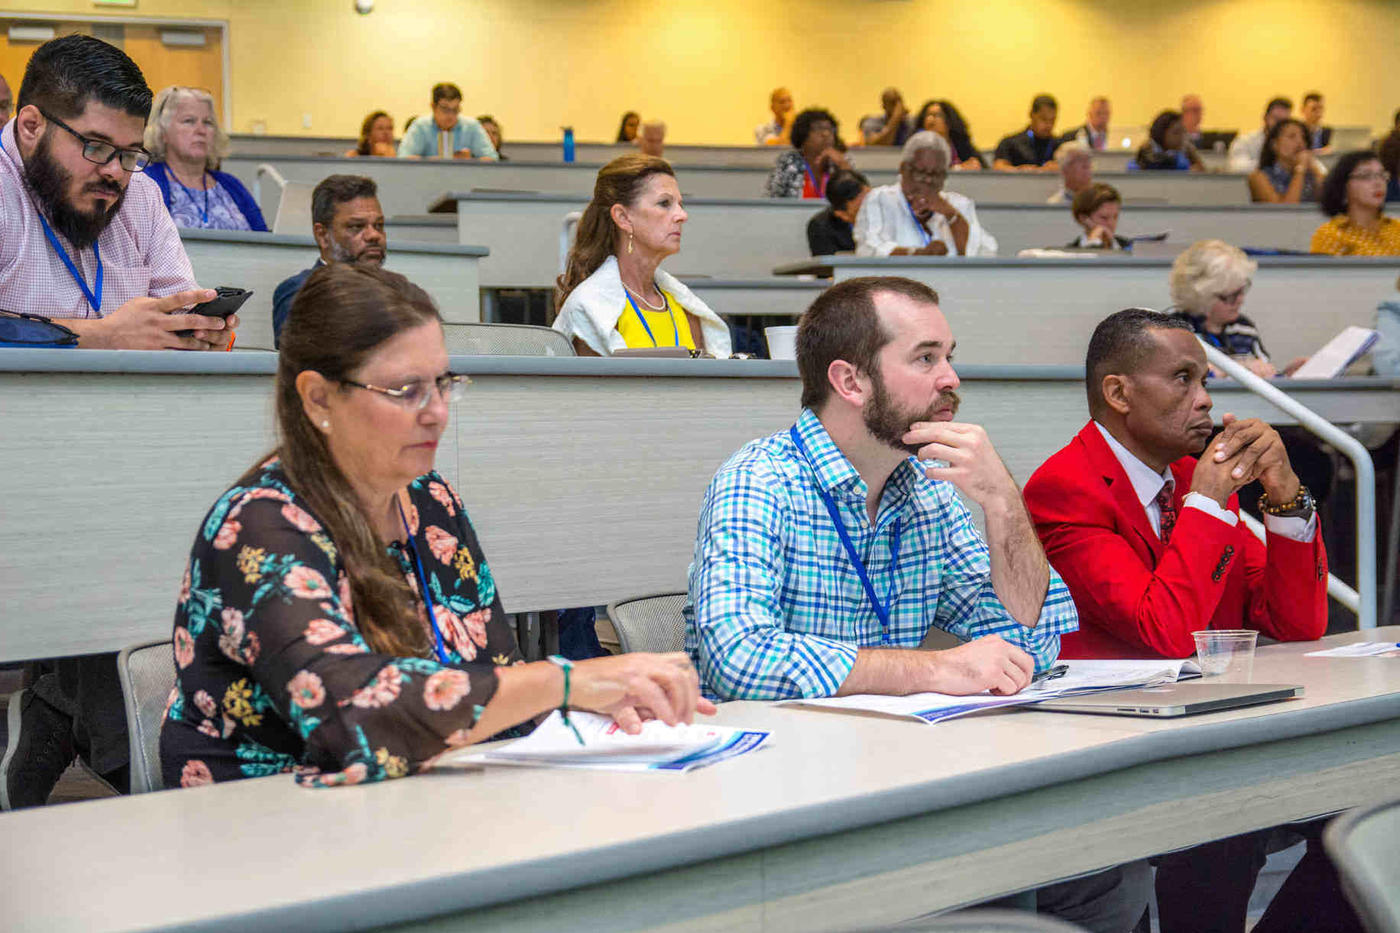 Attendees at 2019 International Conference on Disaster Medicine and Hurricane Resiliency